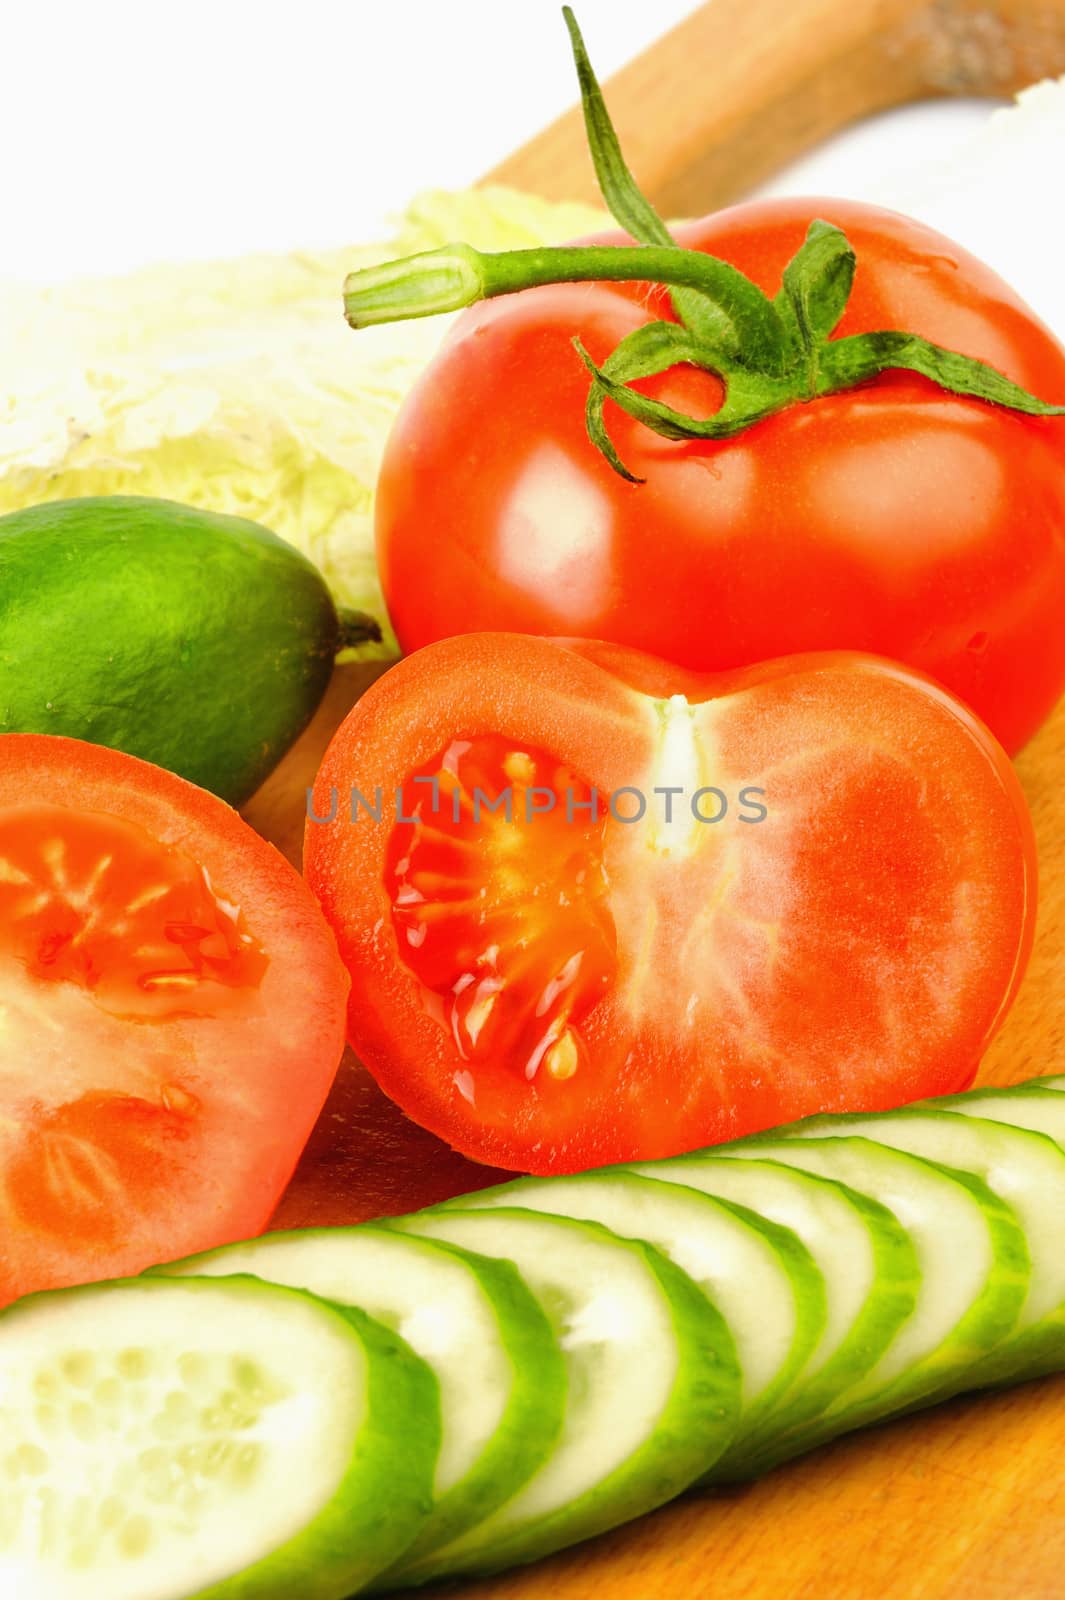 Tomatoes and cucumbers beautifully cut on the Board